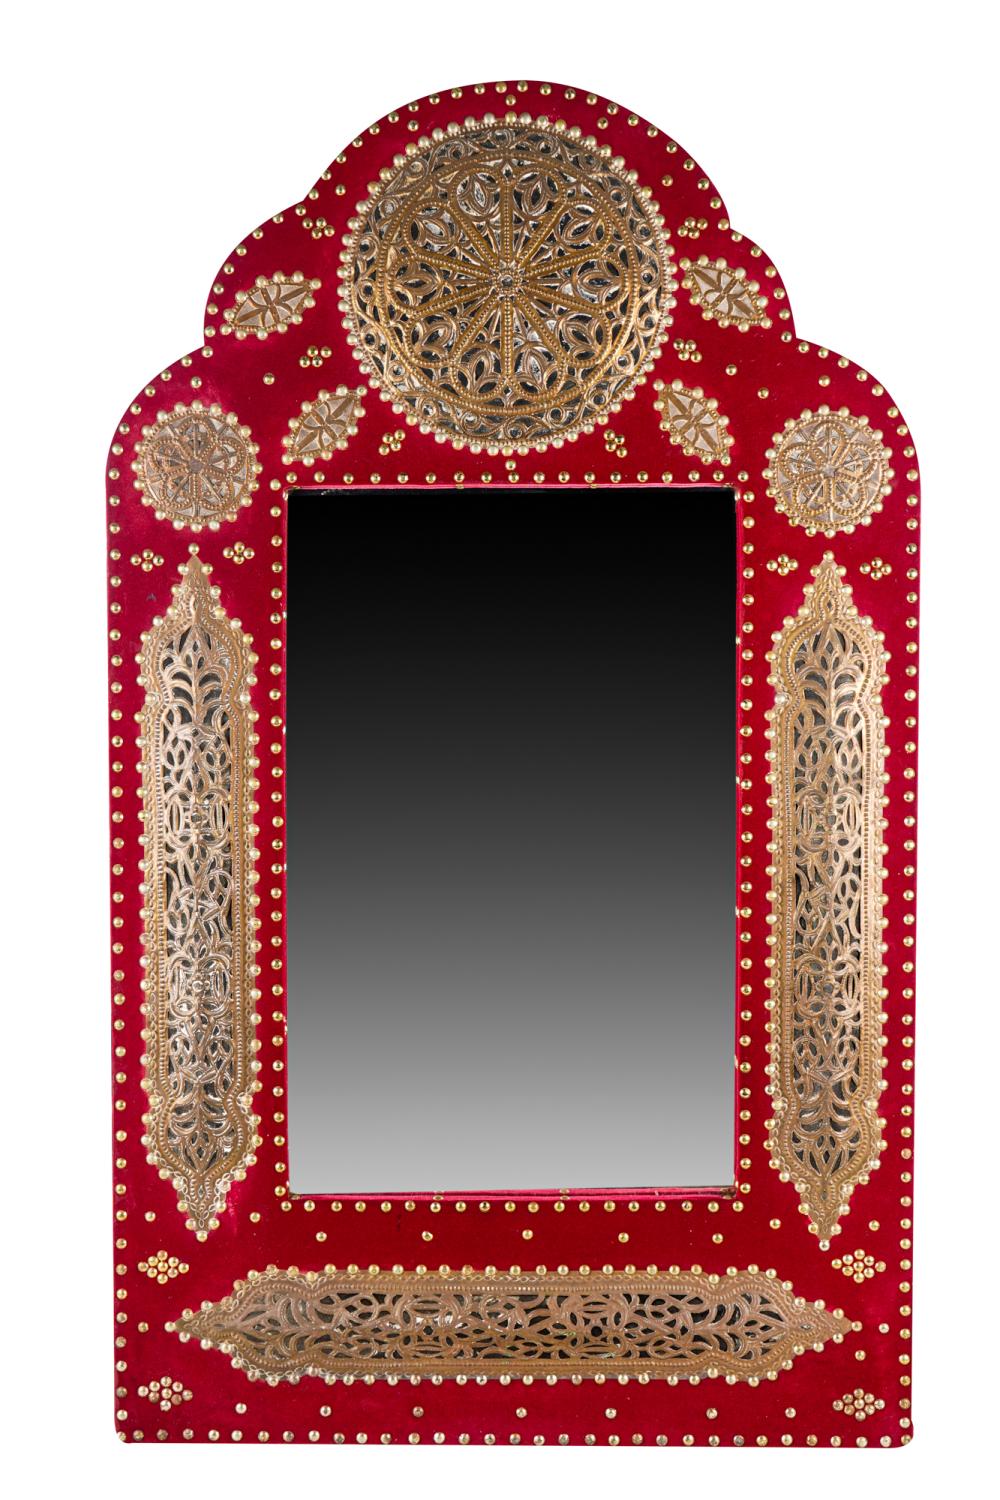 NORTH AFRICAN DECORATED MIRRORwith 3328aa